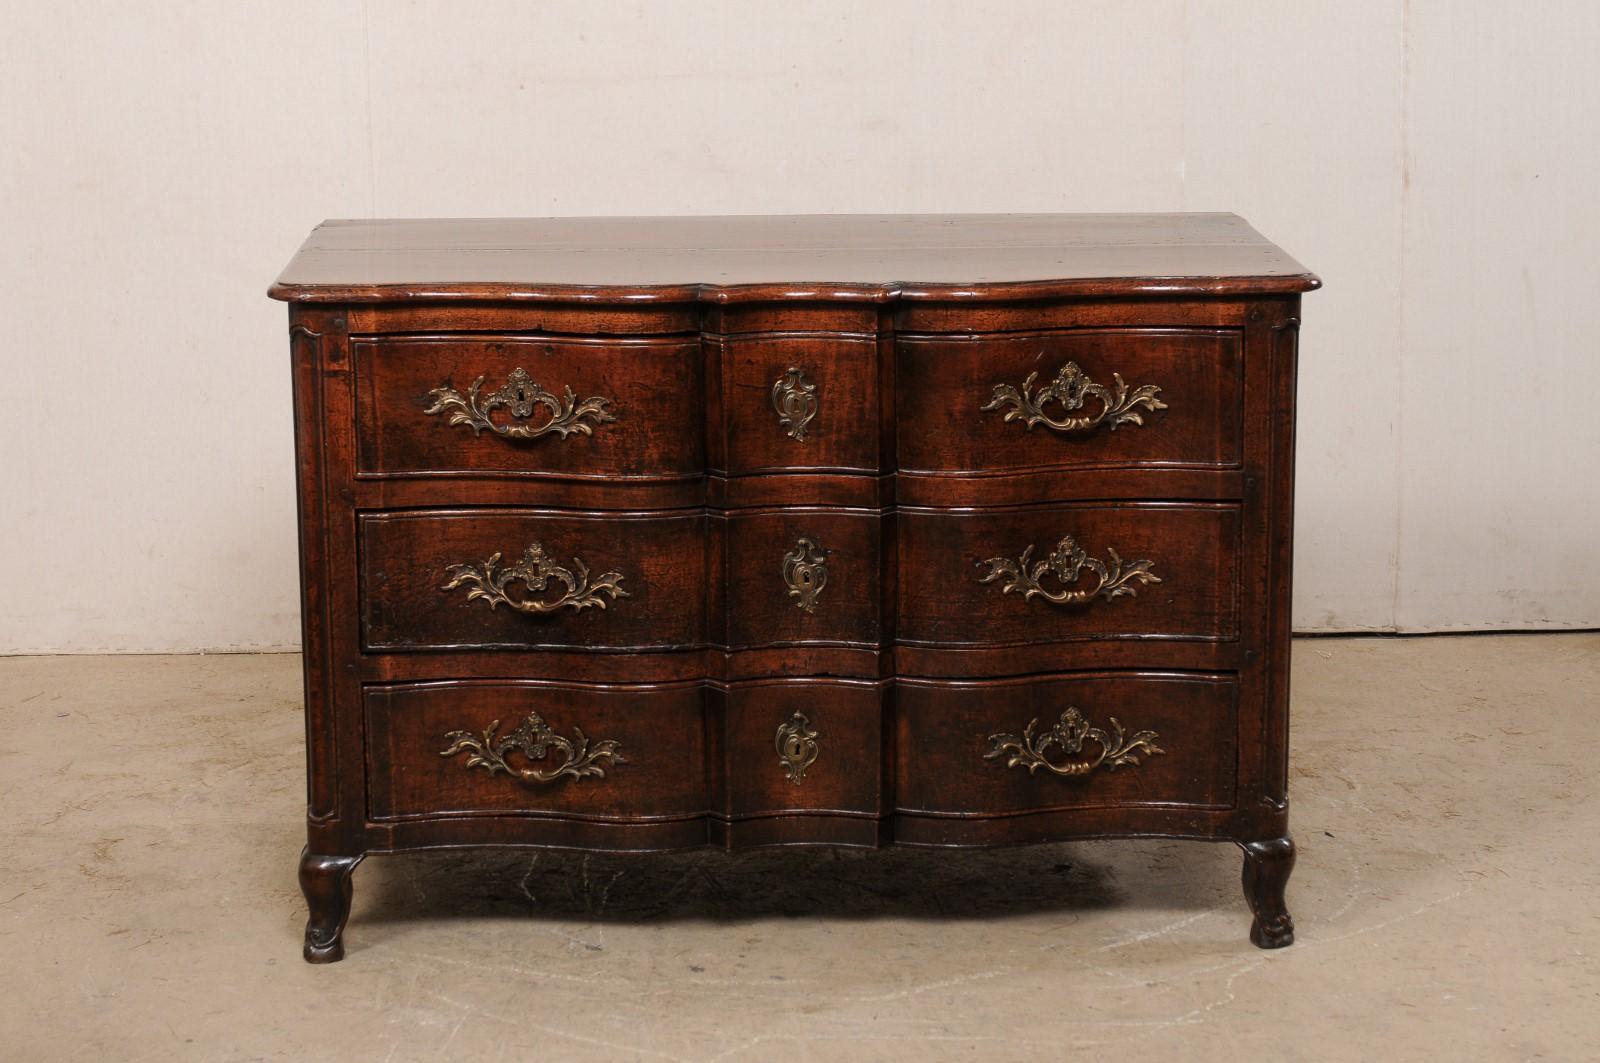 French Rococo Period Serpentine Carved-Wood Chest of Drawers, 18th Century, France For Sale